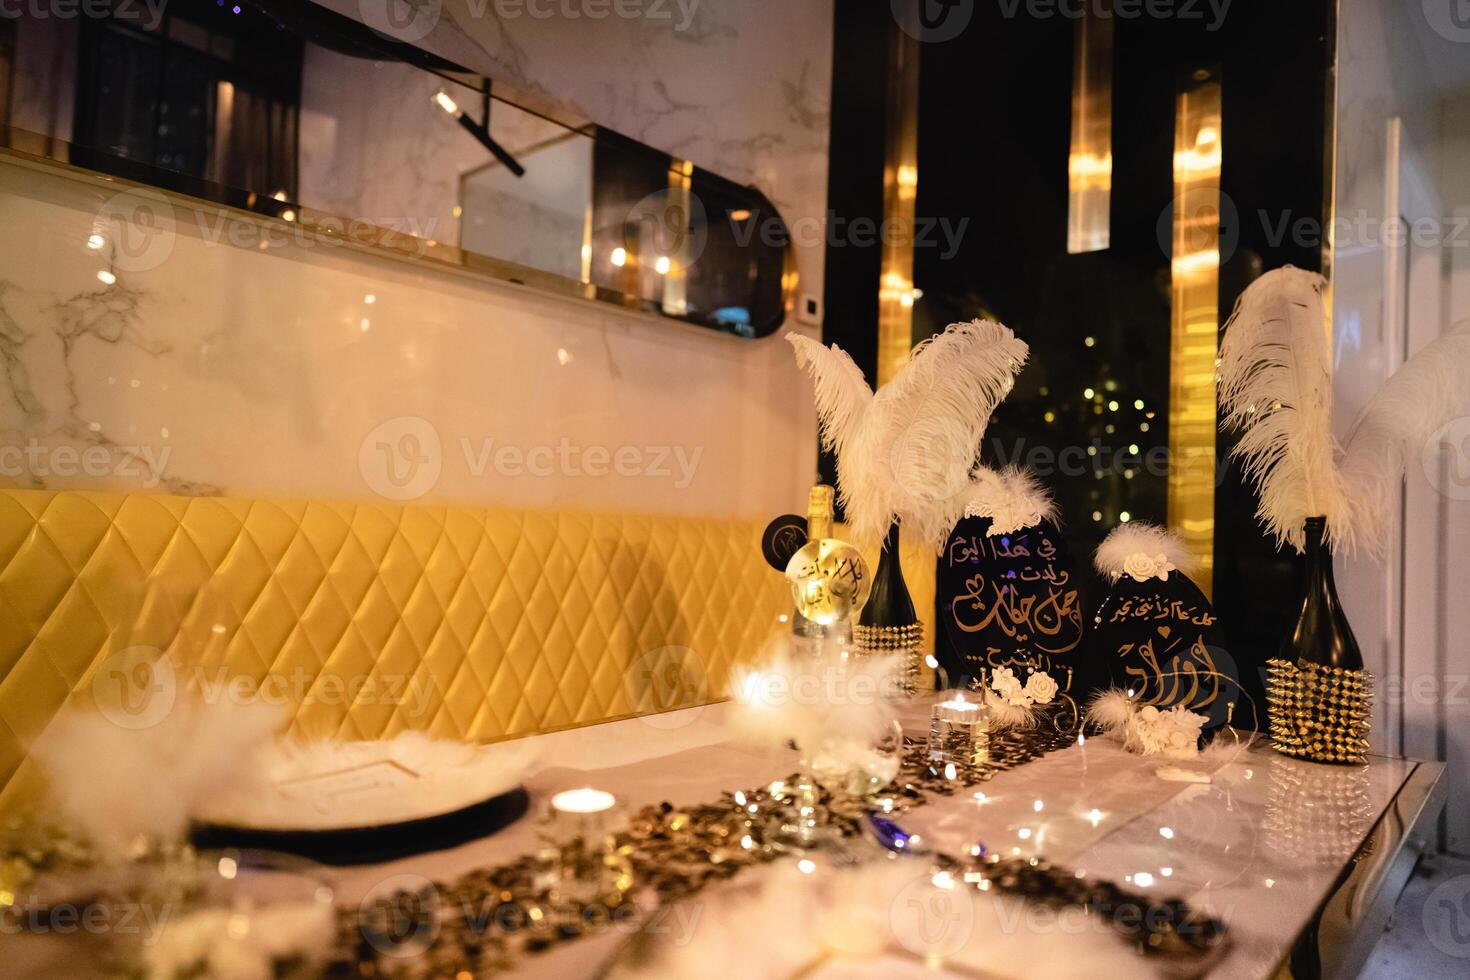 Birthday, party in restaurant, Glasses, candle, Banquet, balloons in restaurant, New year decoration, Christmas, xmas, celebration, family, business, diner in the cafe, shallow focus, holiday photo